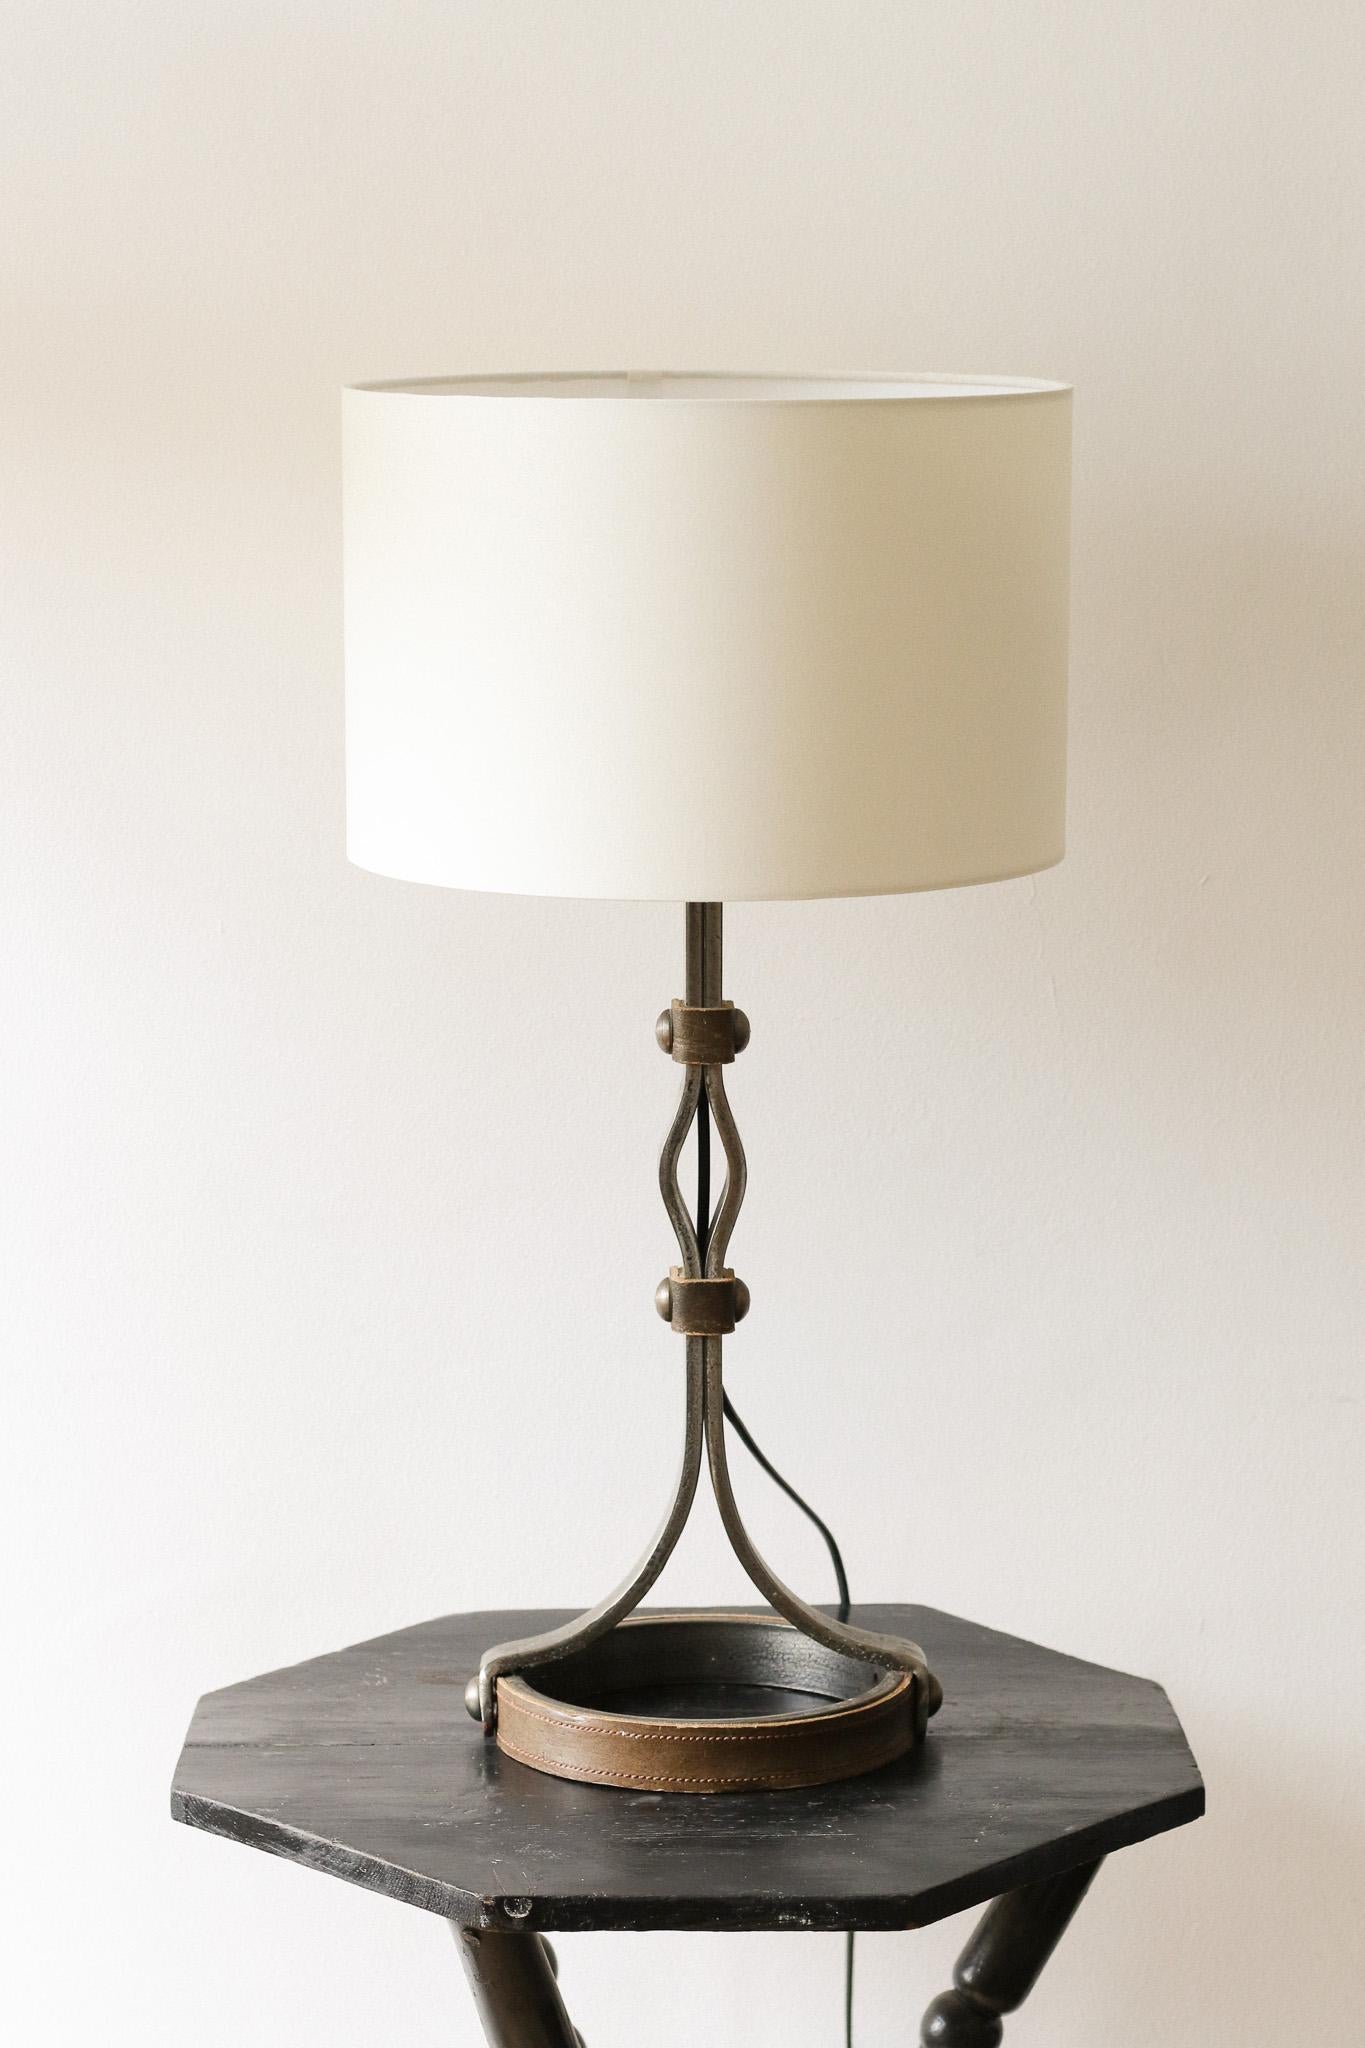 A wrought iron and studded brown leather table lamp by Jean-Pierre Ryckaert. Heavy and skilfully made with large rivets and circular base.

France, Circa 1950.

Height (with shade): 60cm
Height (without shade, to top of bulb holder): 45cm
Width